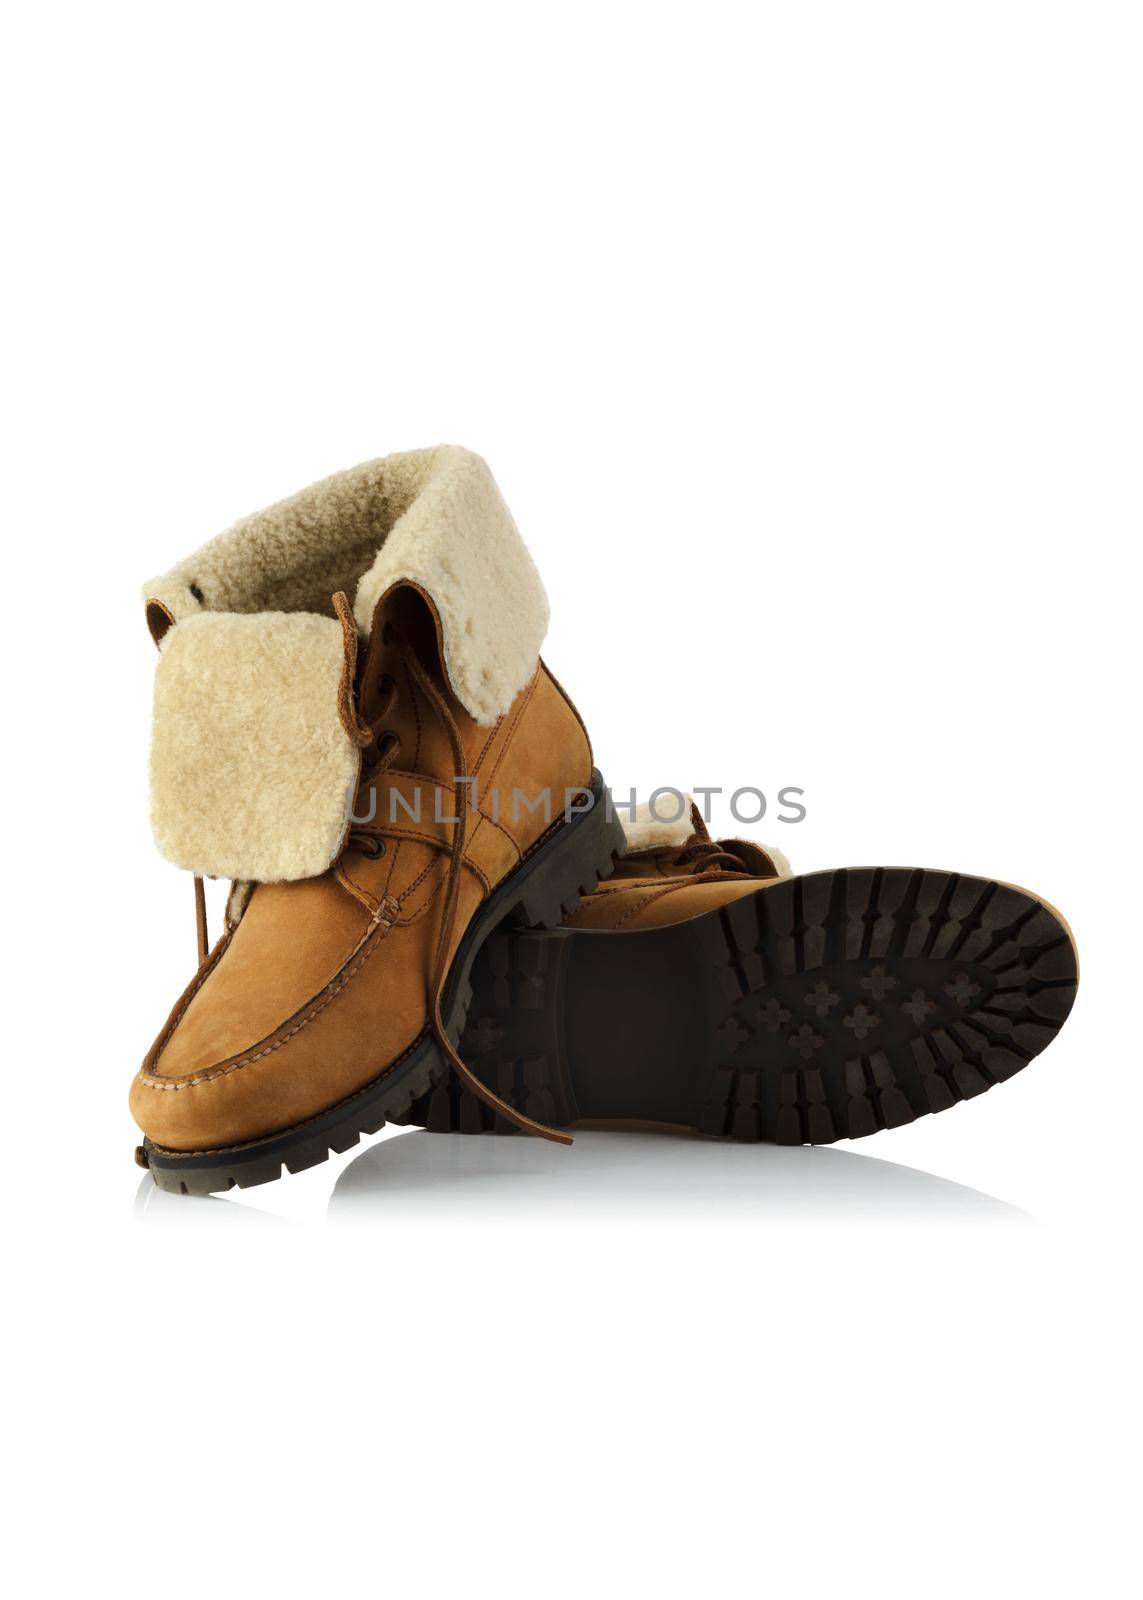 Pair of warm winter boots isolated on white